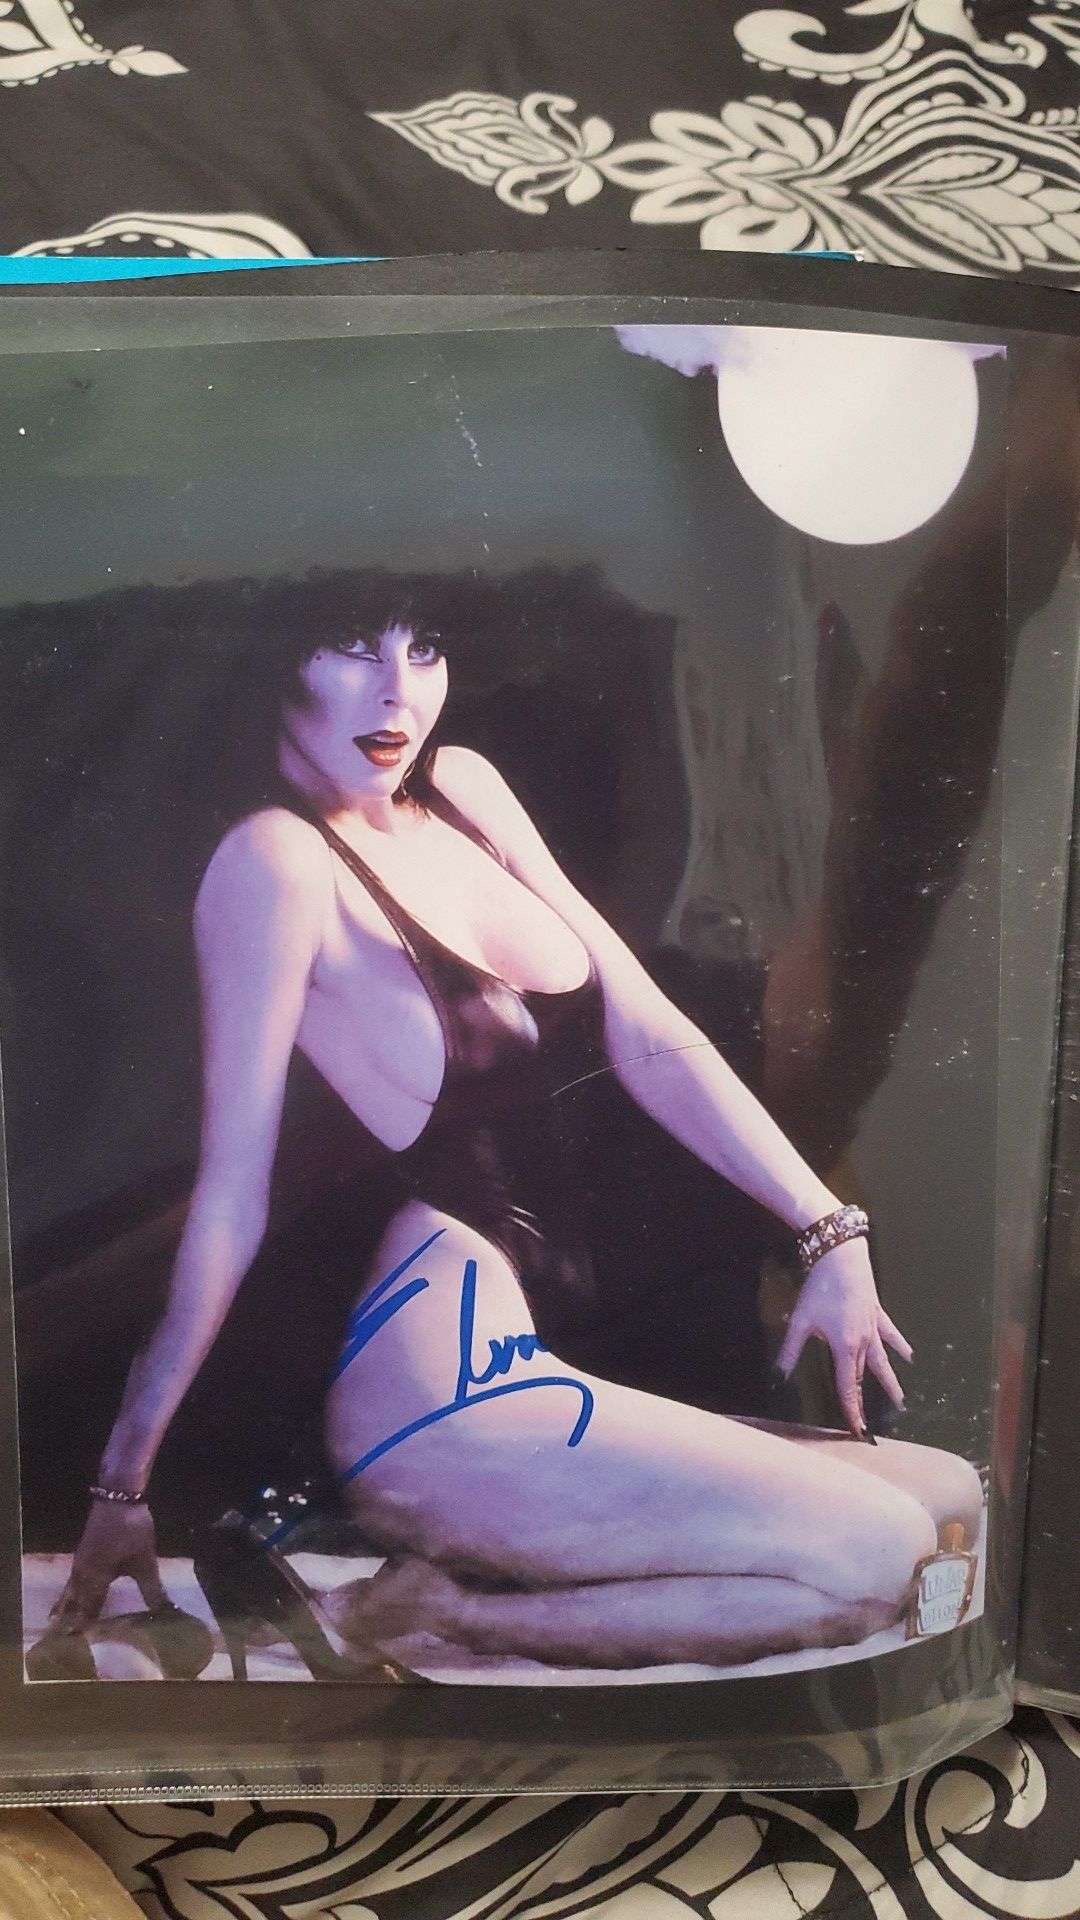 Elvira Print of signed photo...not actually signed